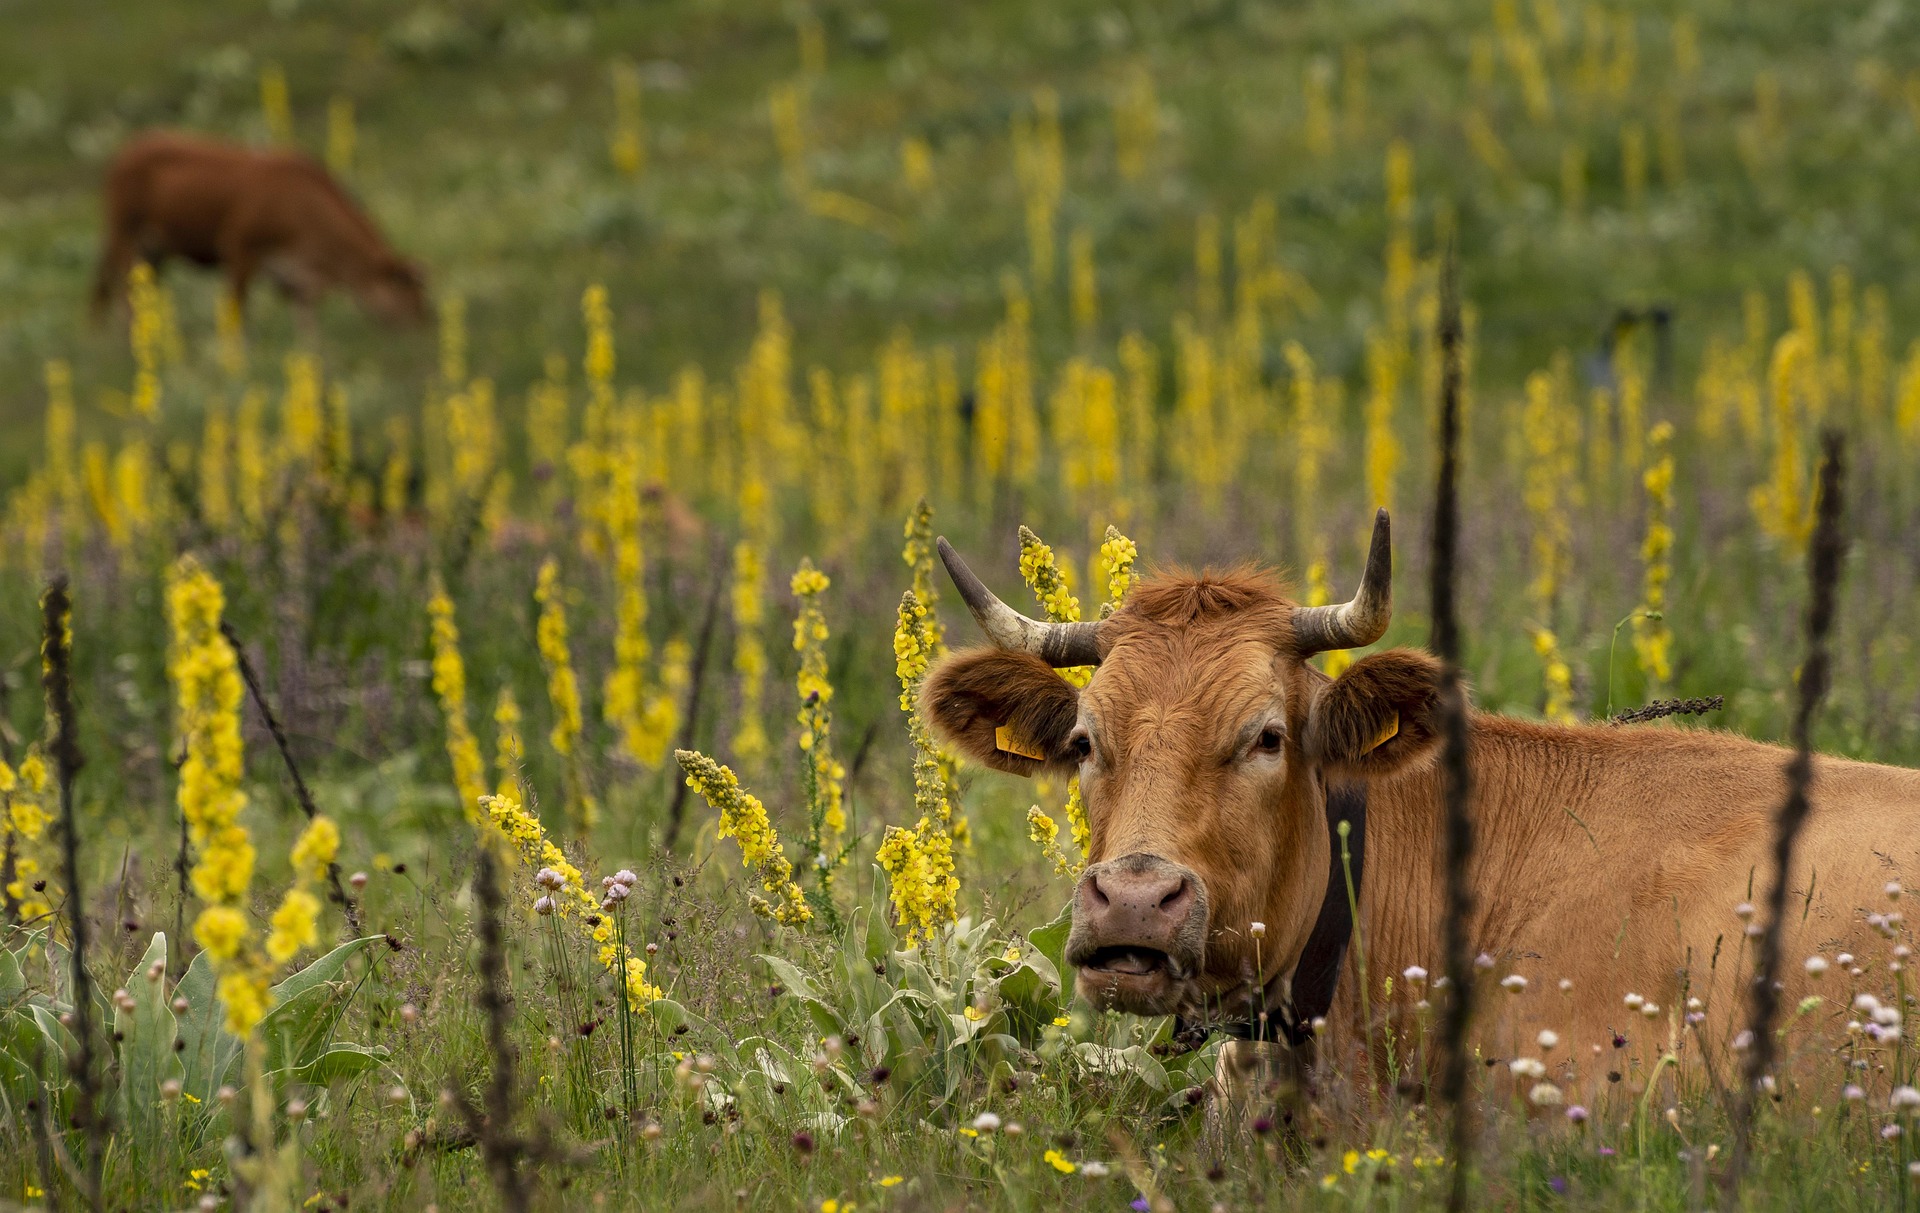 Image of a brown and white cow standing in a field.